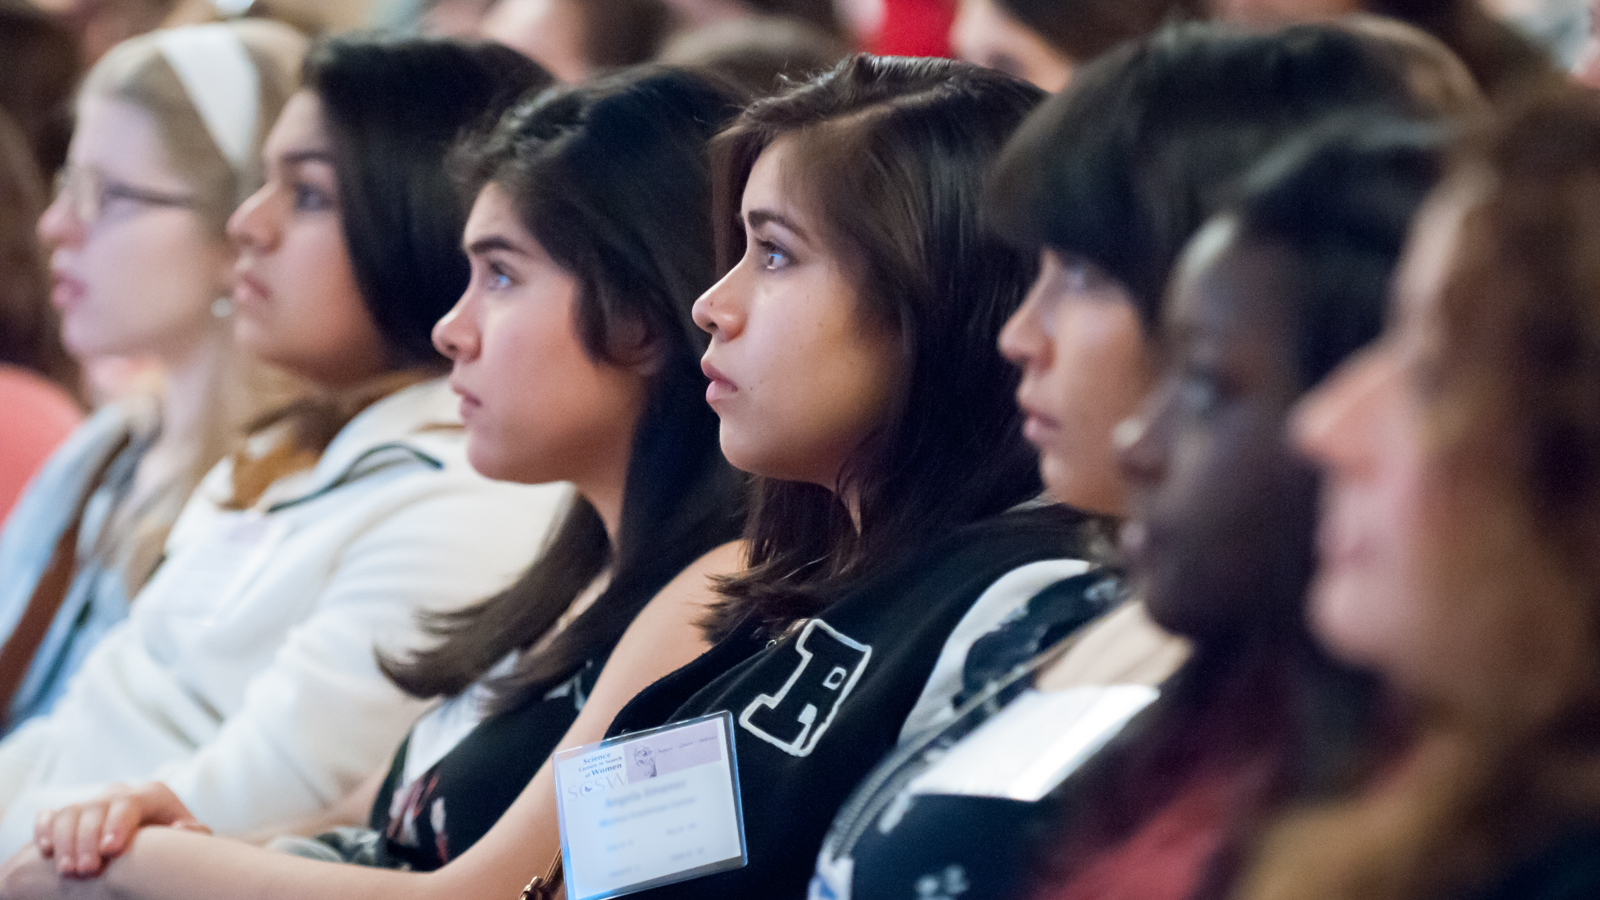 Chicago-area high schoolers listen to Argonne researchers and professionals talk about careers in STEM.